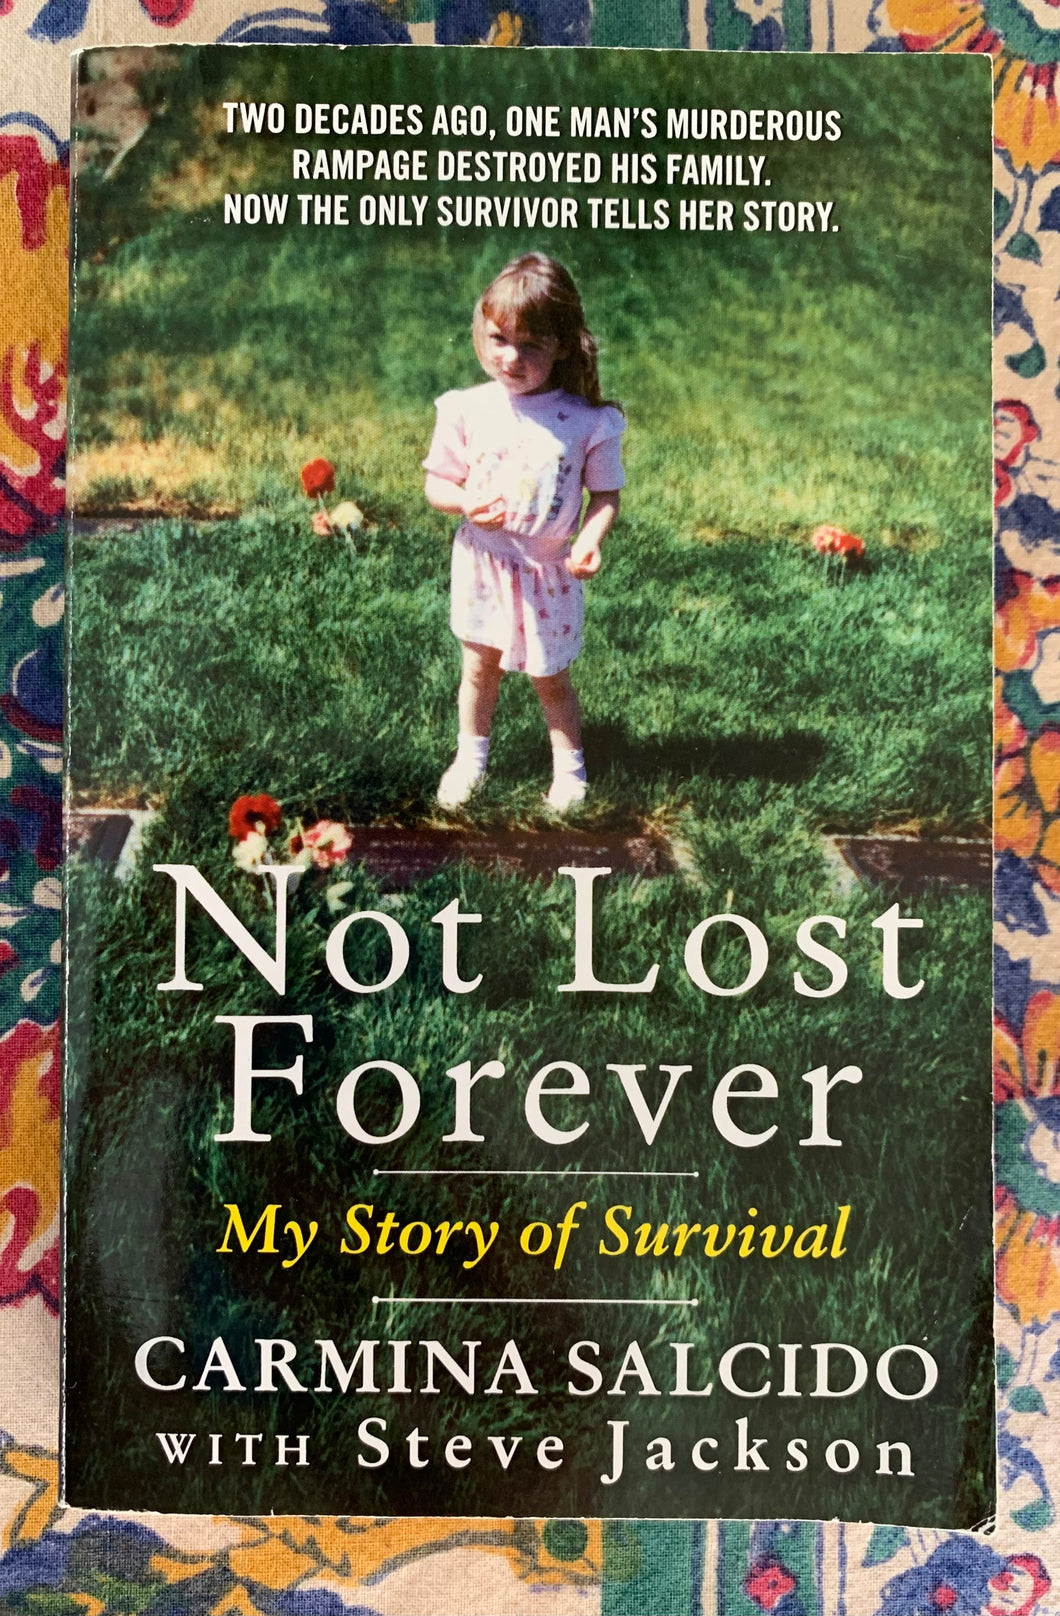 Not Lost Forever: My Story of Survival